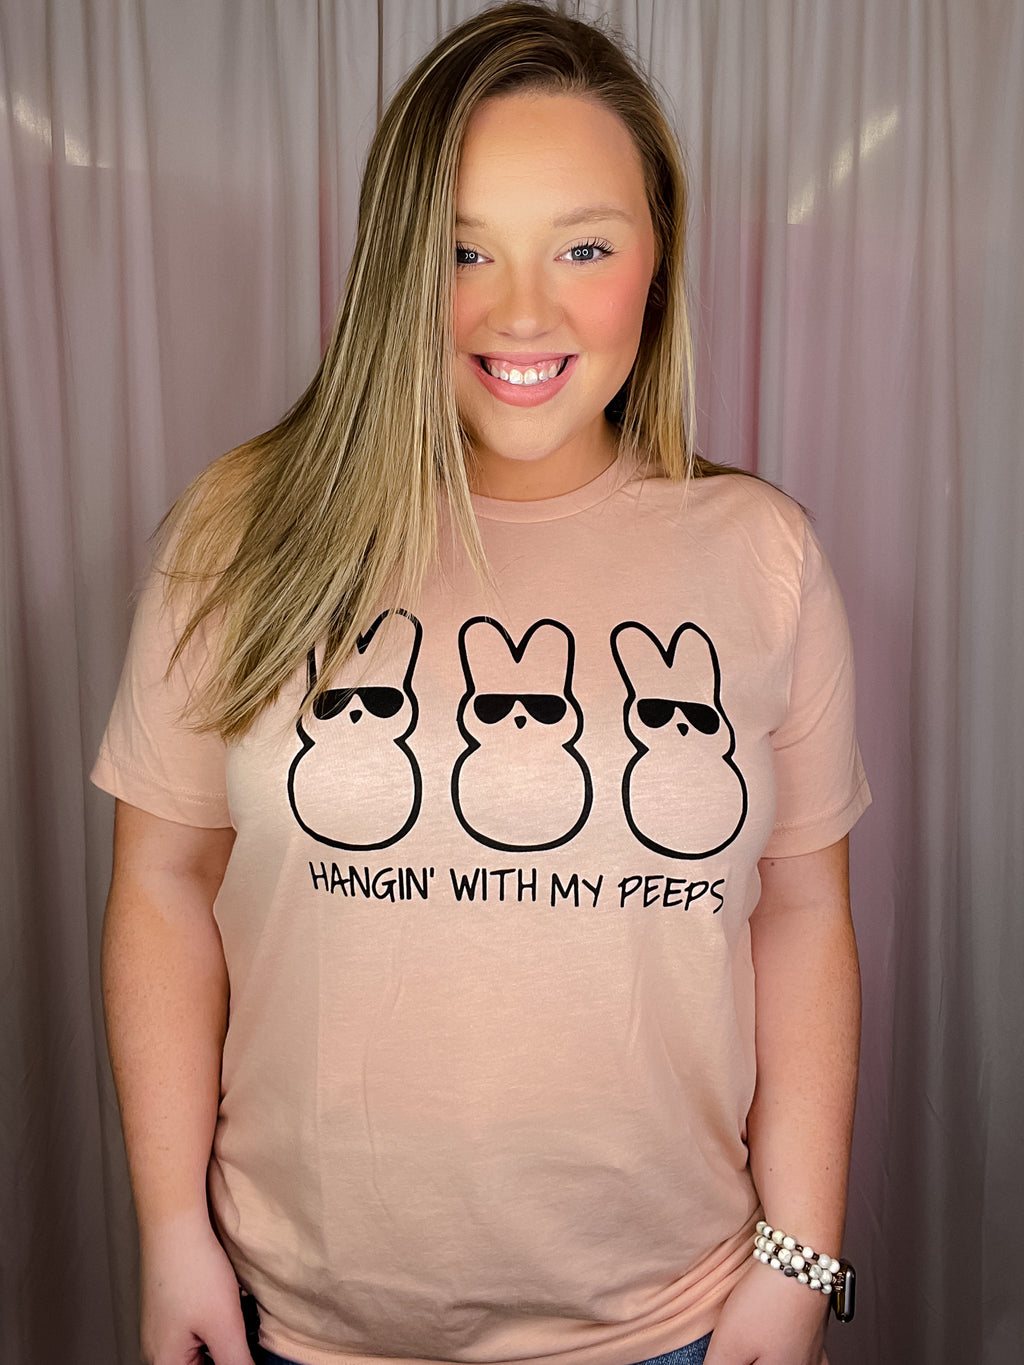 Our Hangin' With My Peeps Tee features a comfortable, unisex fit with a round neckline and short sleeves. This cool design features a cheerful Easter-themed peeps pattern, making it perfect for any season. Crafted from lightweight and breathable fabric, this tee is sure to keep you feeling comfortable as you show off your style.